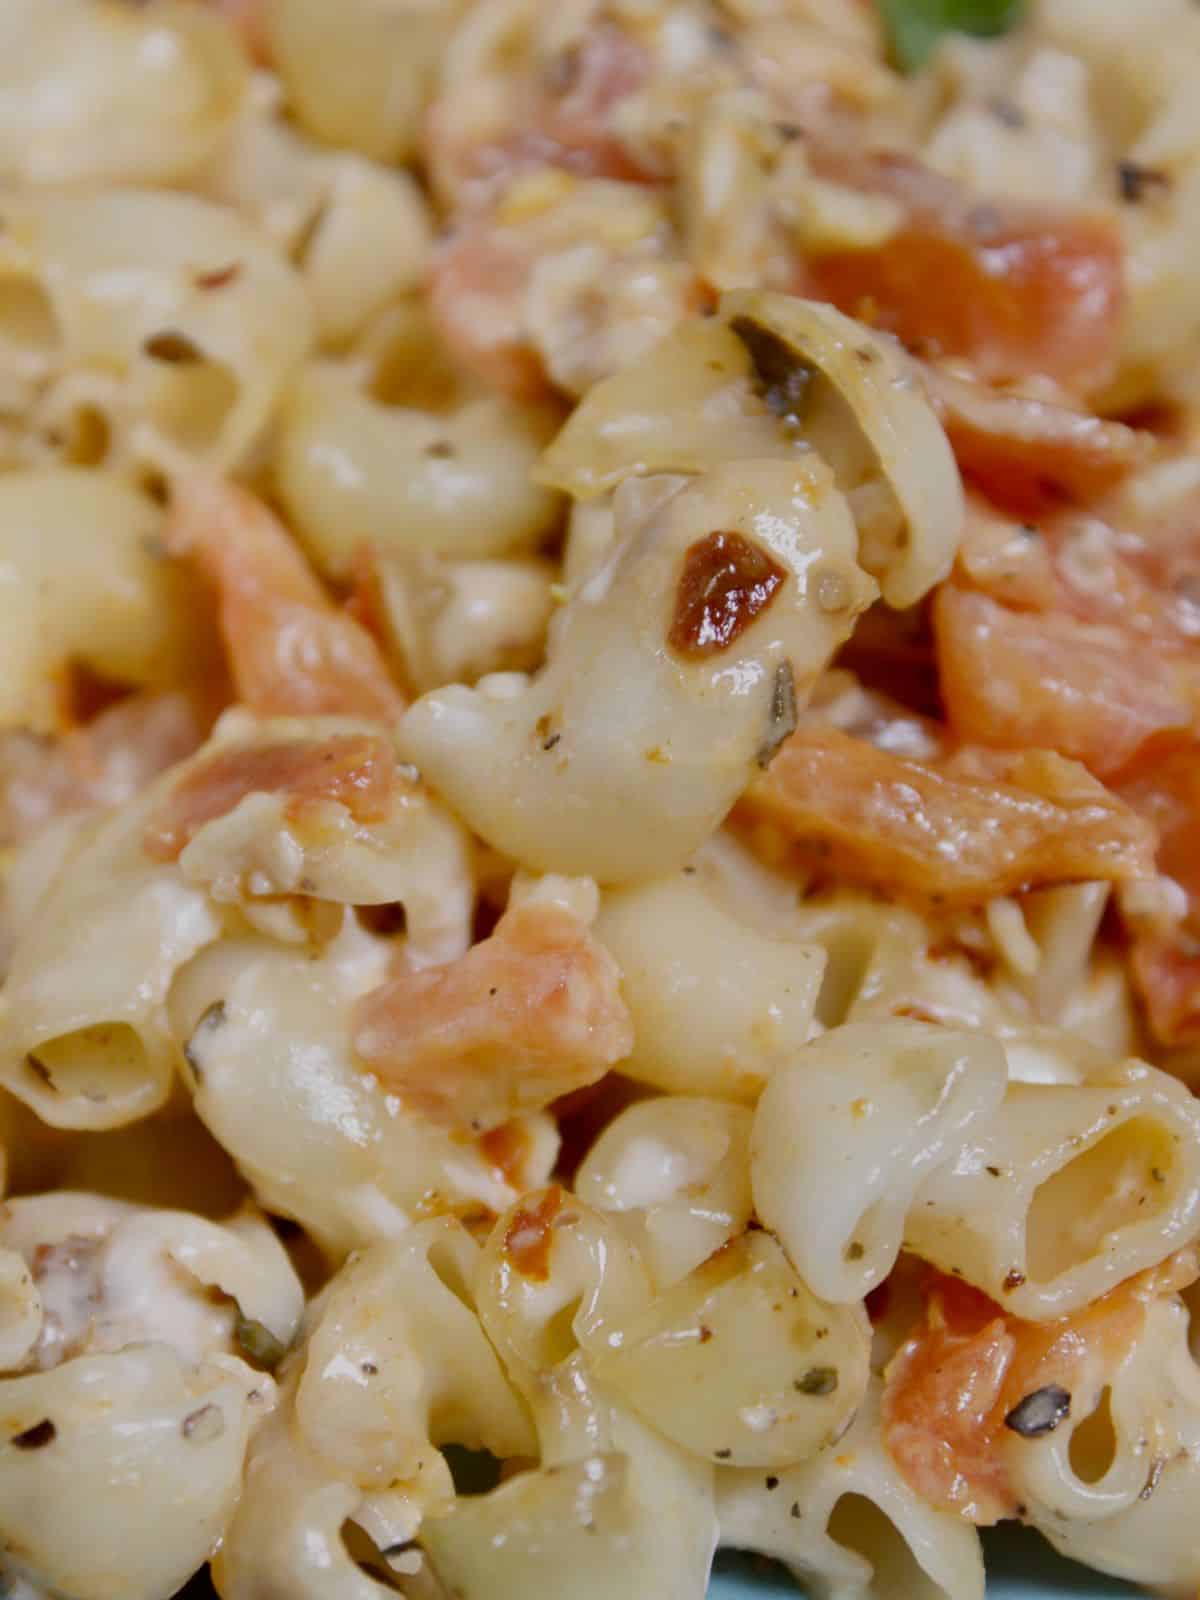 Super zoom in image of baked pasta in a casserole